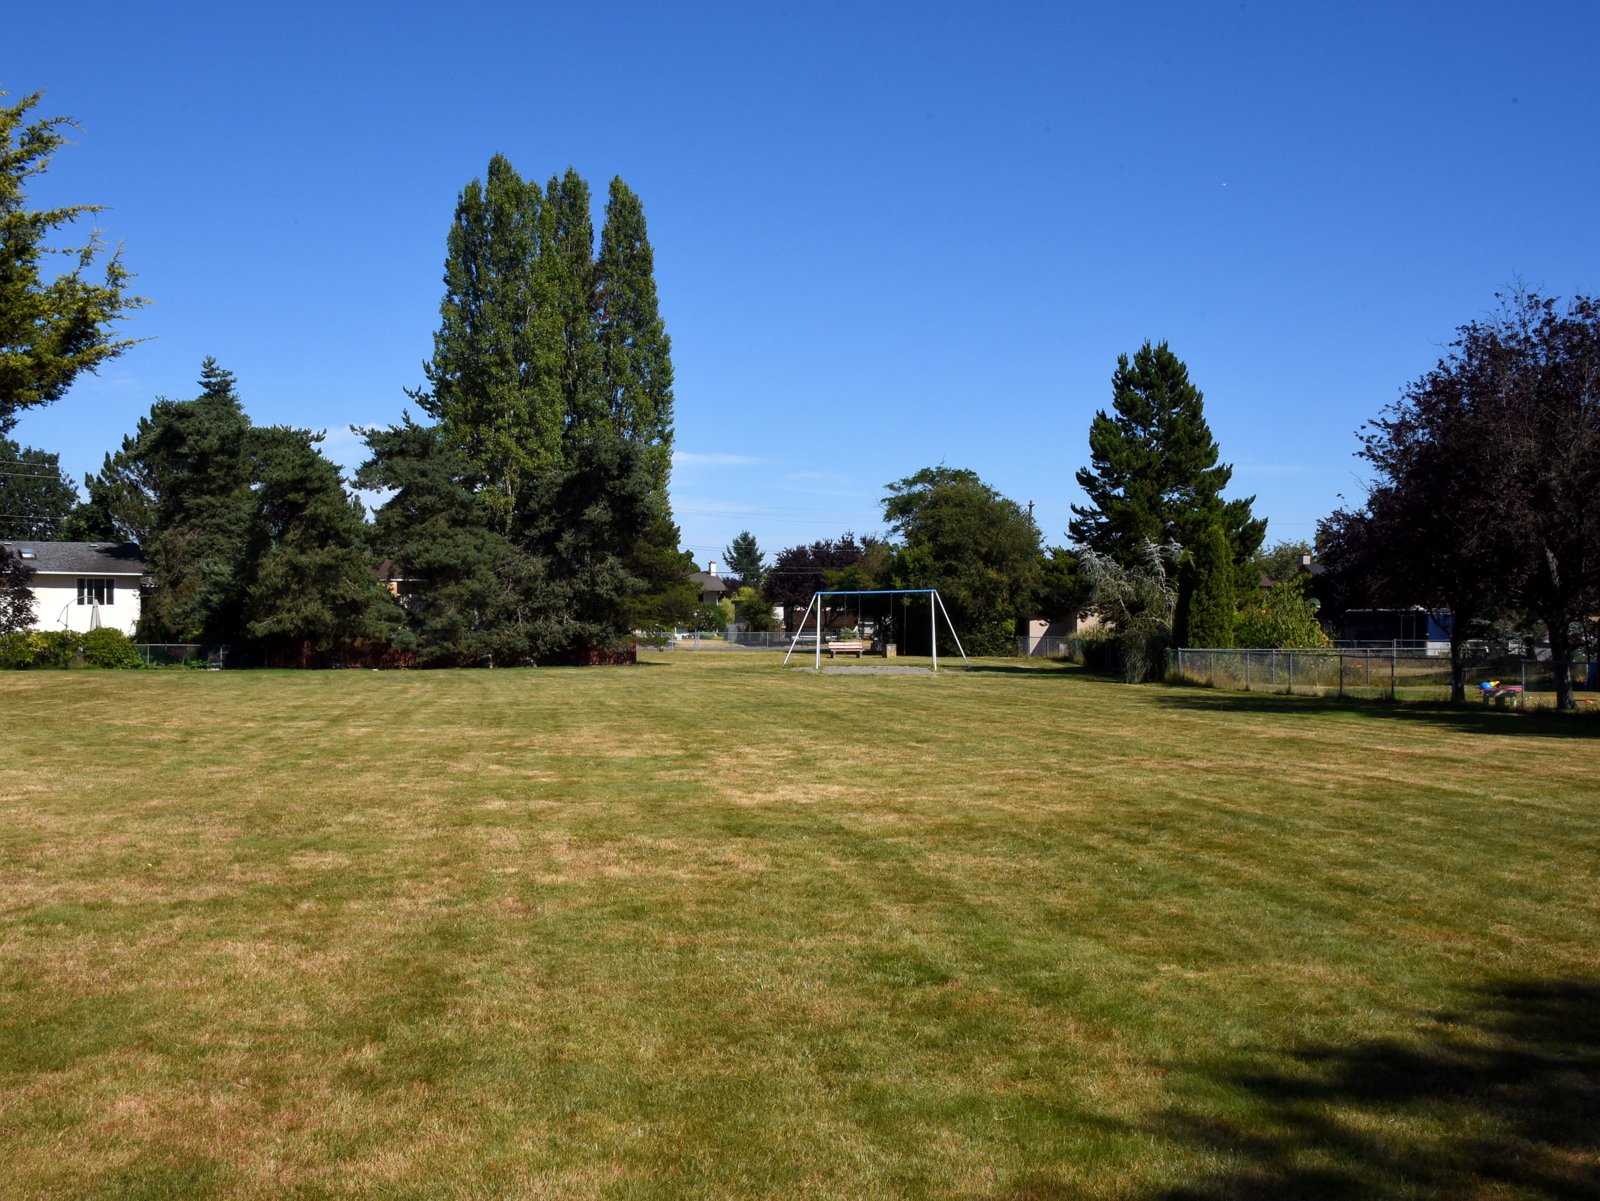 Image of Beaver Park with a grassy field and two swing swingset and a bench in the background.